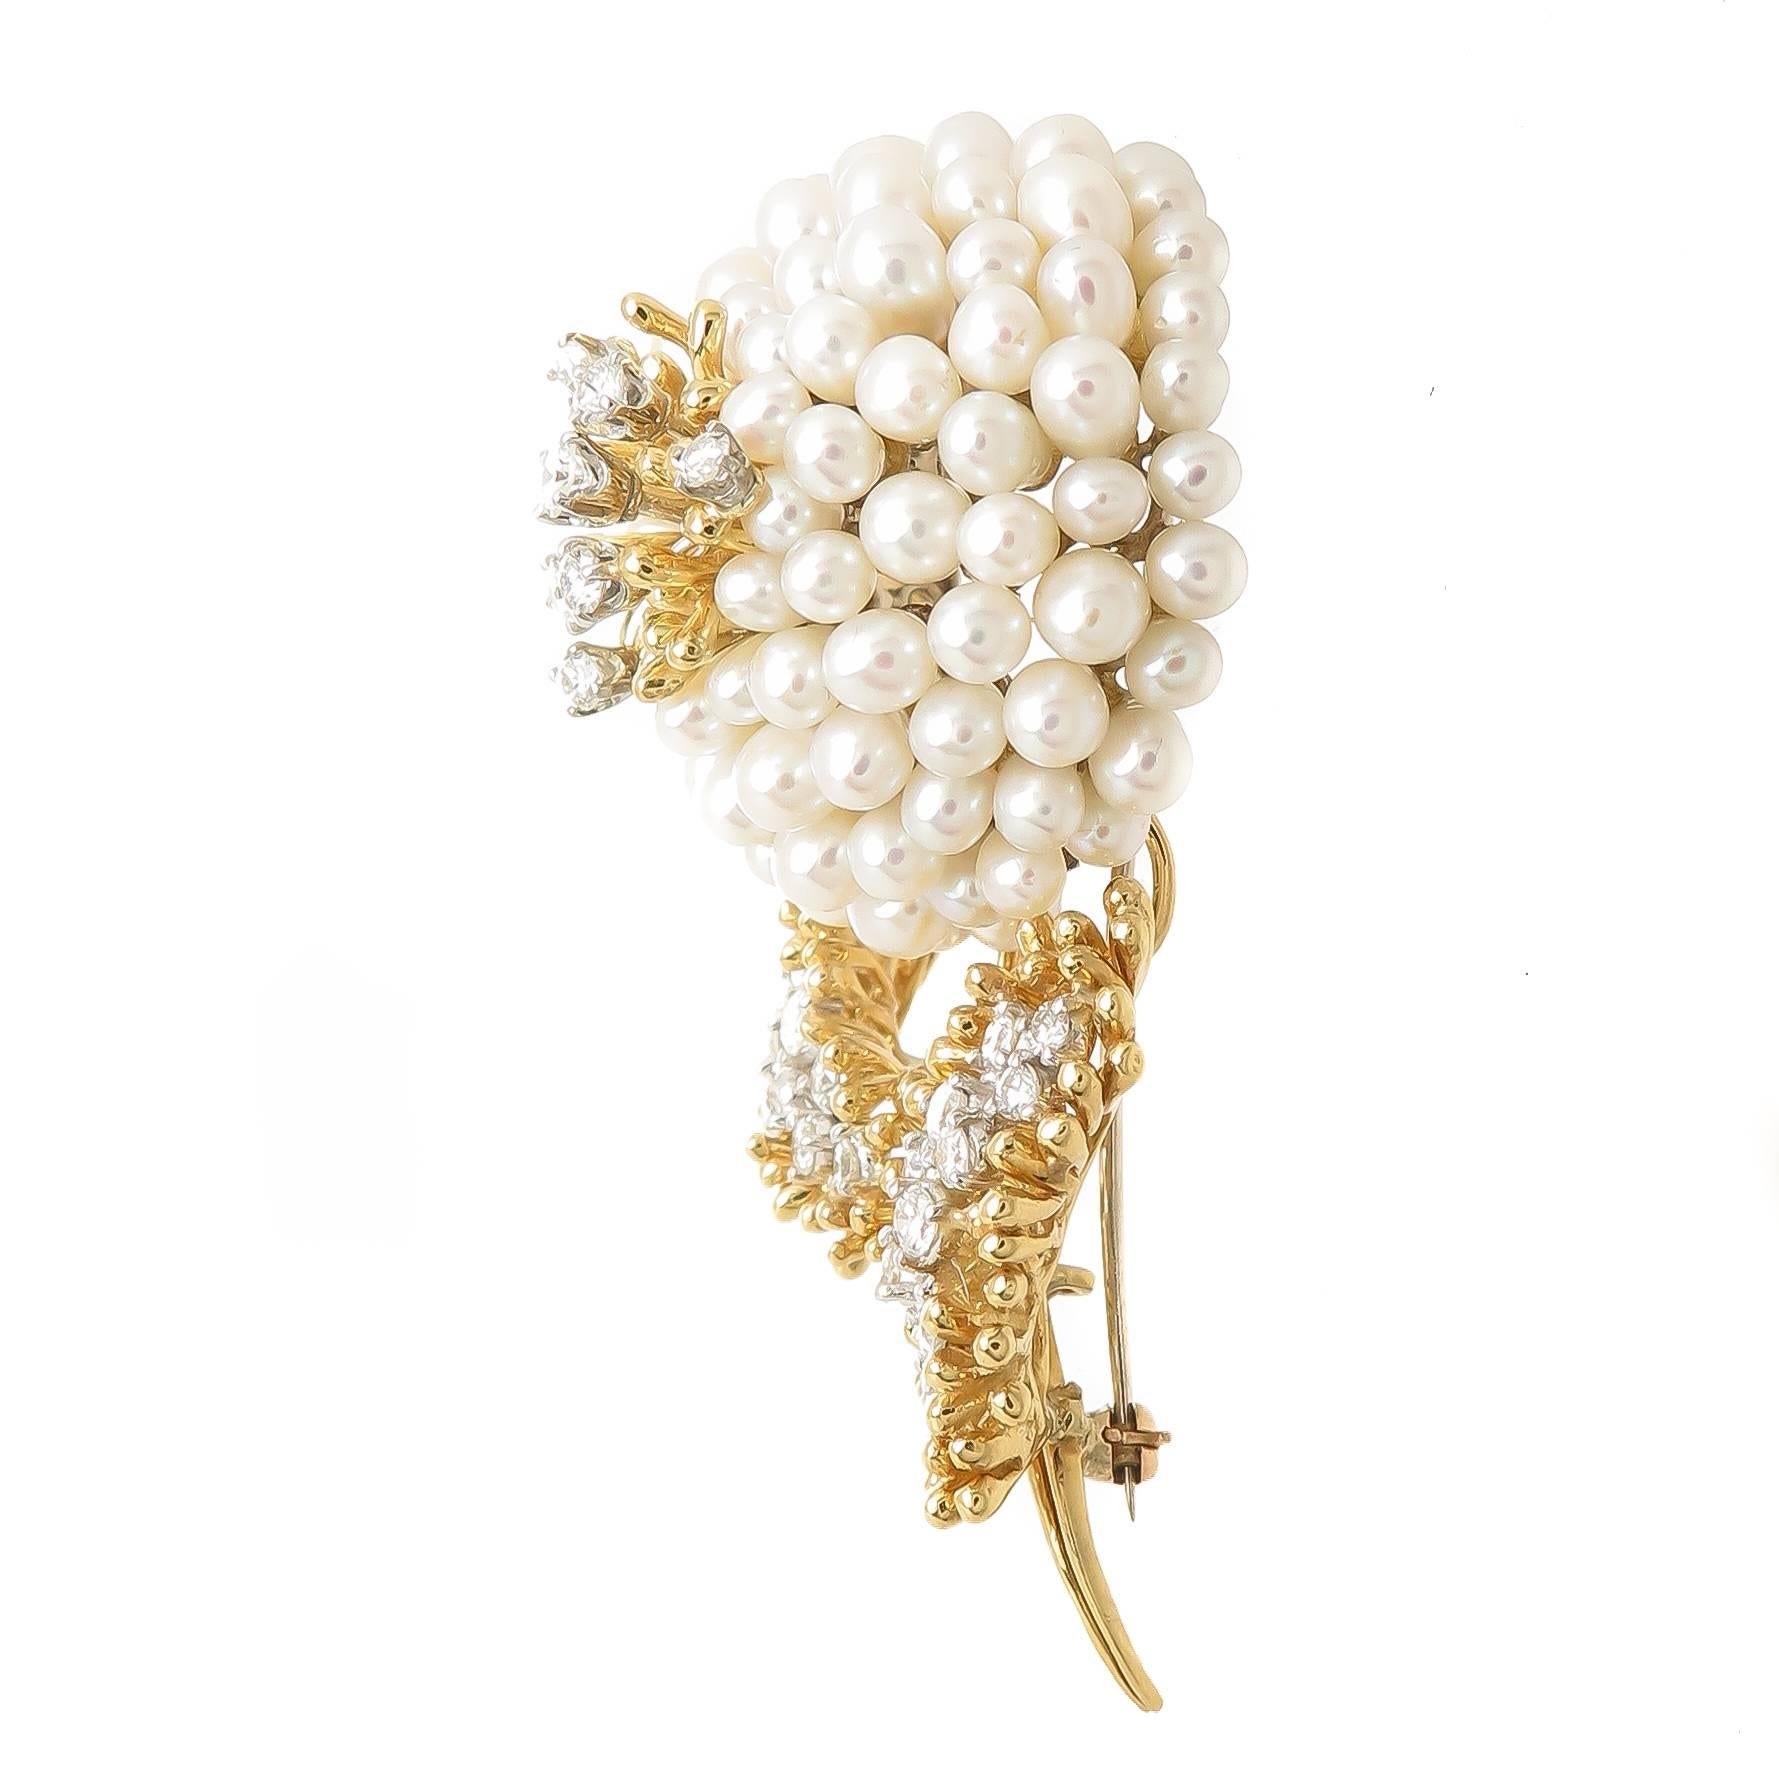 Circa 1980s Kurt Wayne 18K yellow Gold Flower Brooch, set with Round Brilliant cut Diamonds totaling 1.50 Carat and Grading as G in Color and VS in Clarity, further set with 3.5 MM Pearls. Measuring 2 5/8 inch in length.